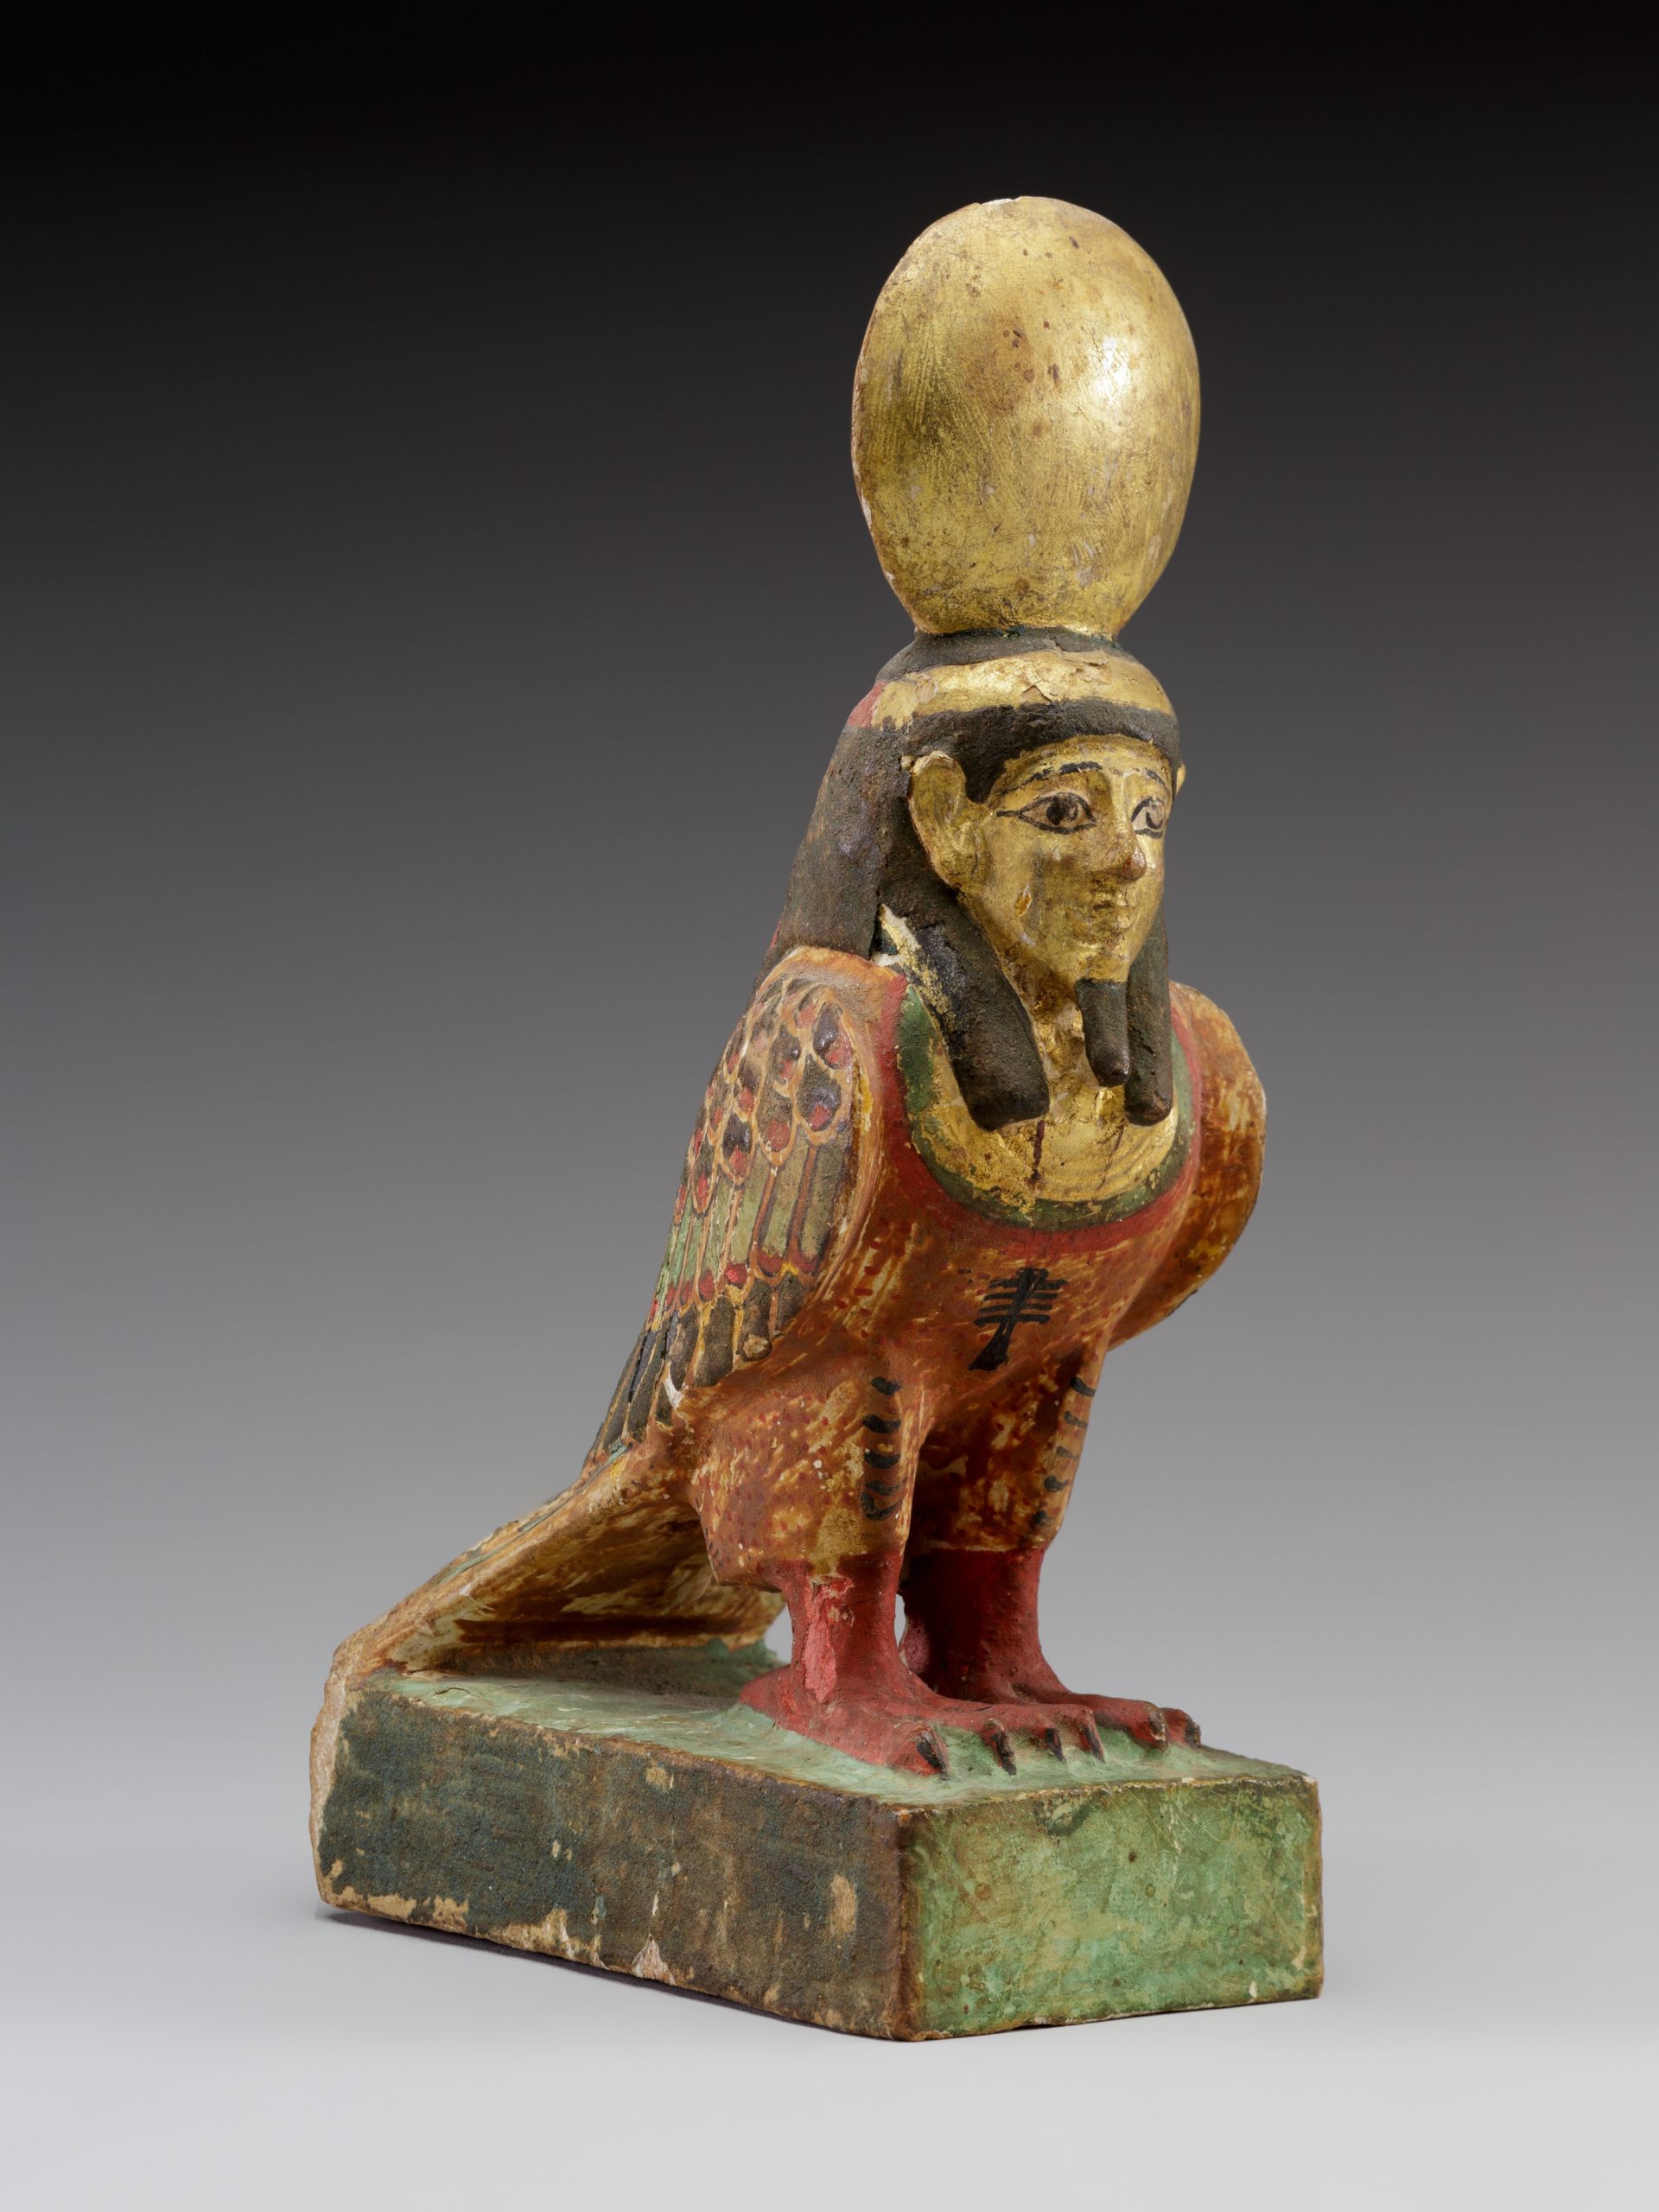 A statuette of an Egyptian Ba-Bird with a gold egg sitting atop the pharaoh head.